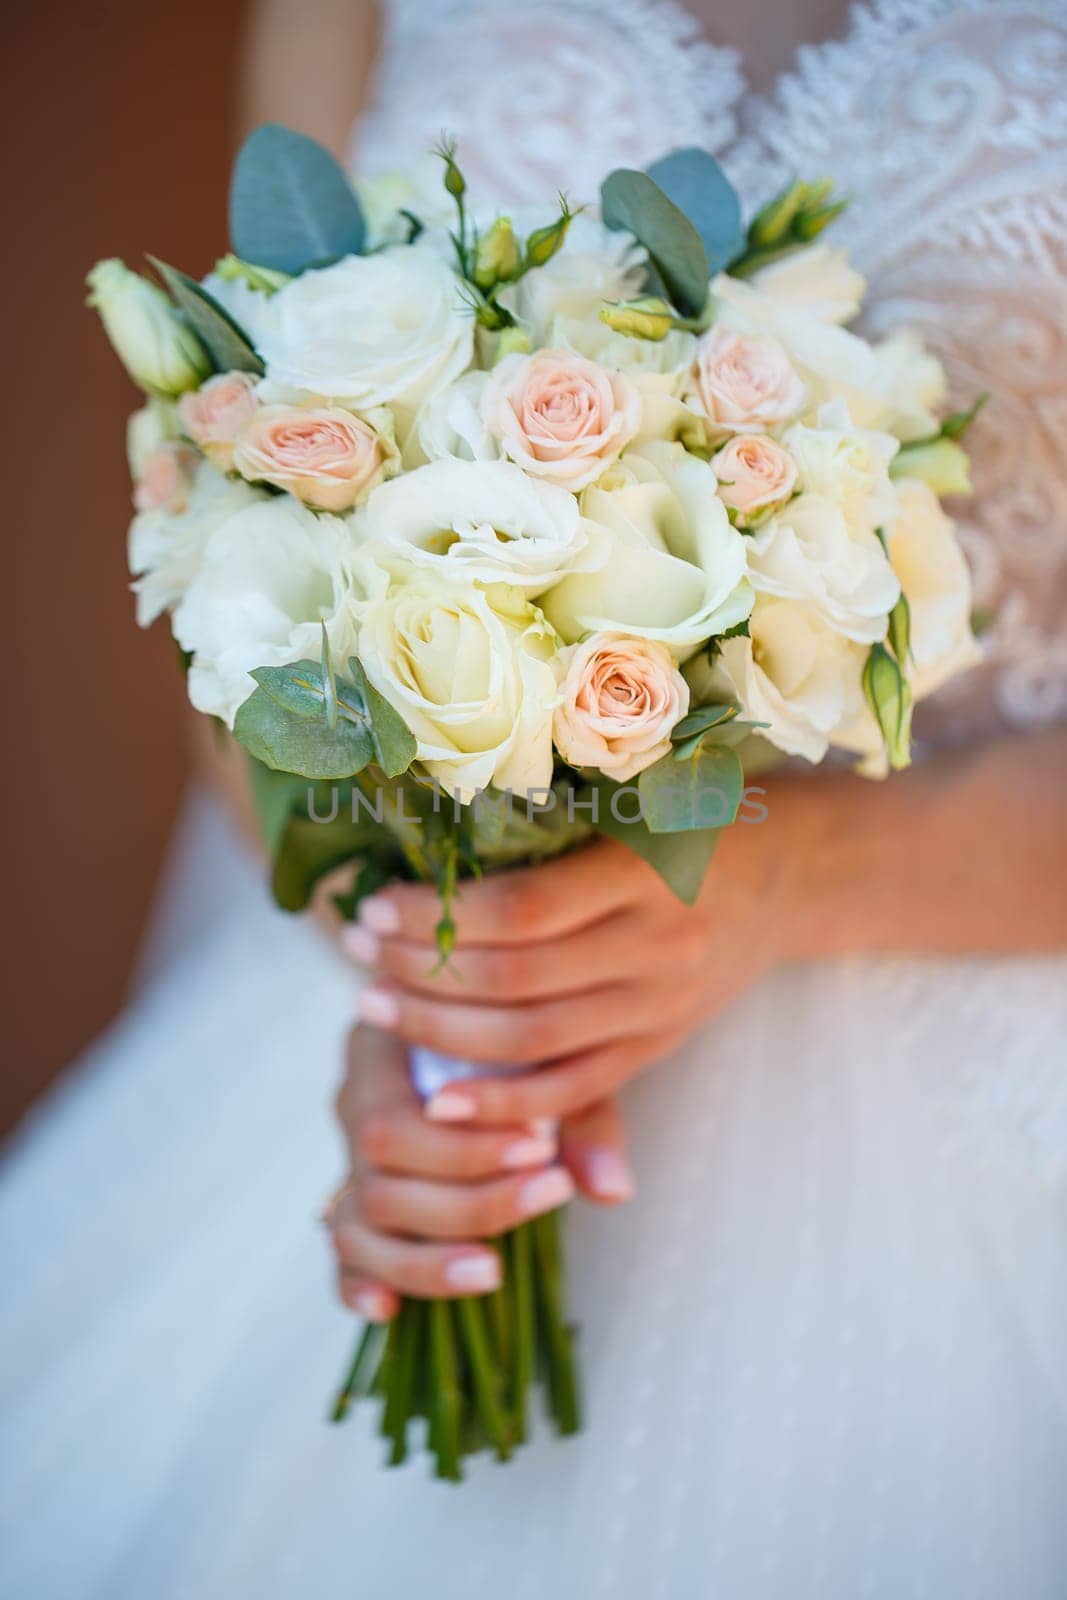 Hands of the bride close-up with a bouquet of fresh beautiful flowers. Attribute of the bride by Dmitrytph